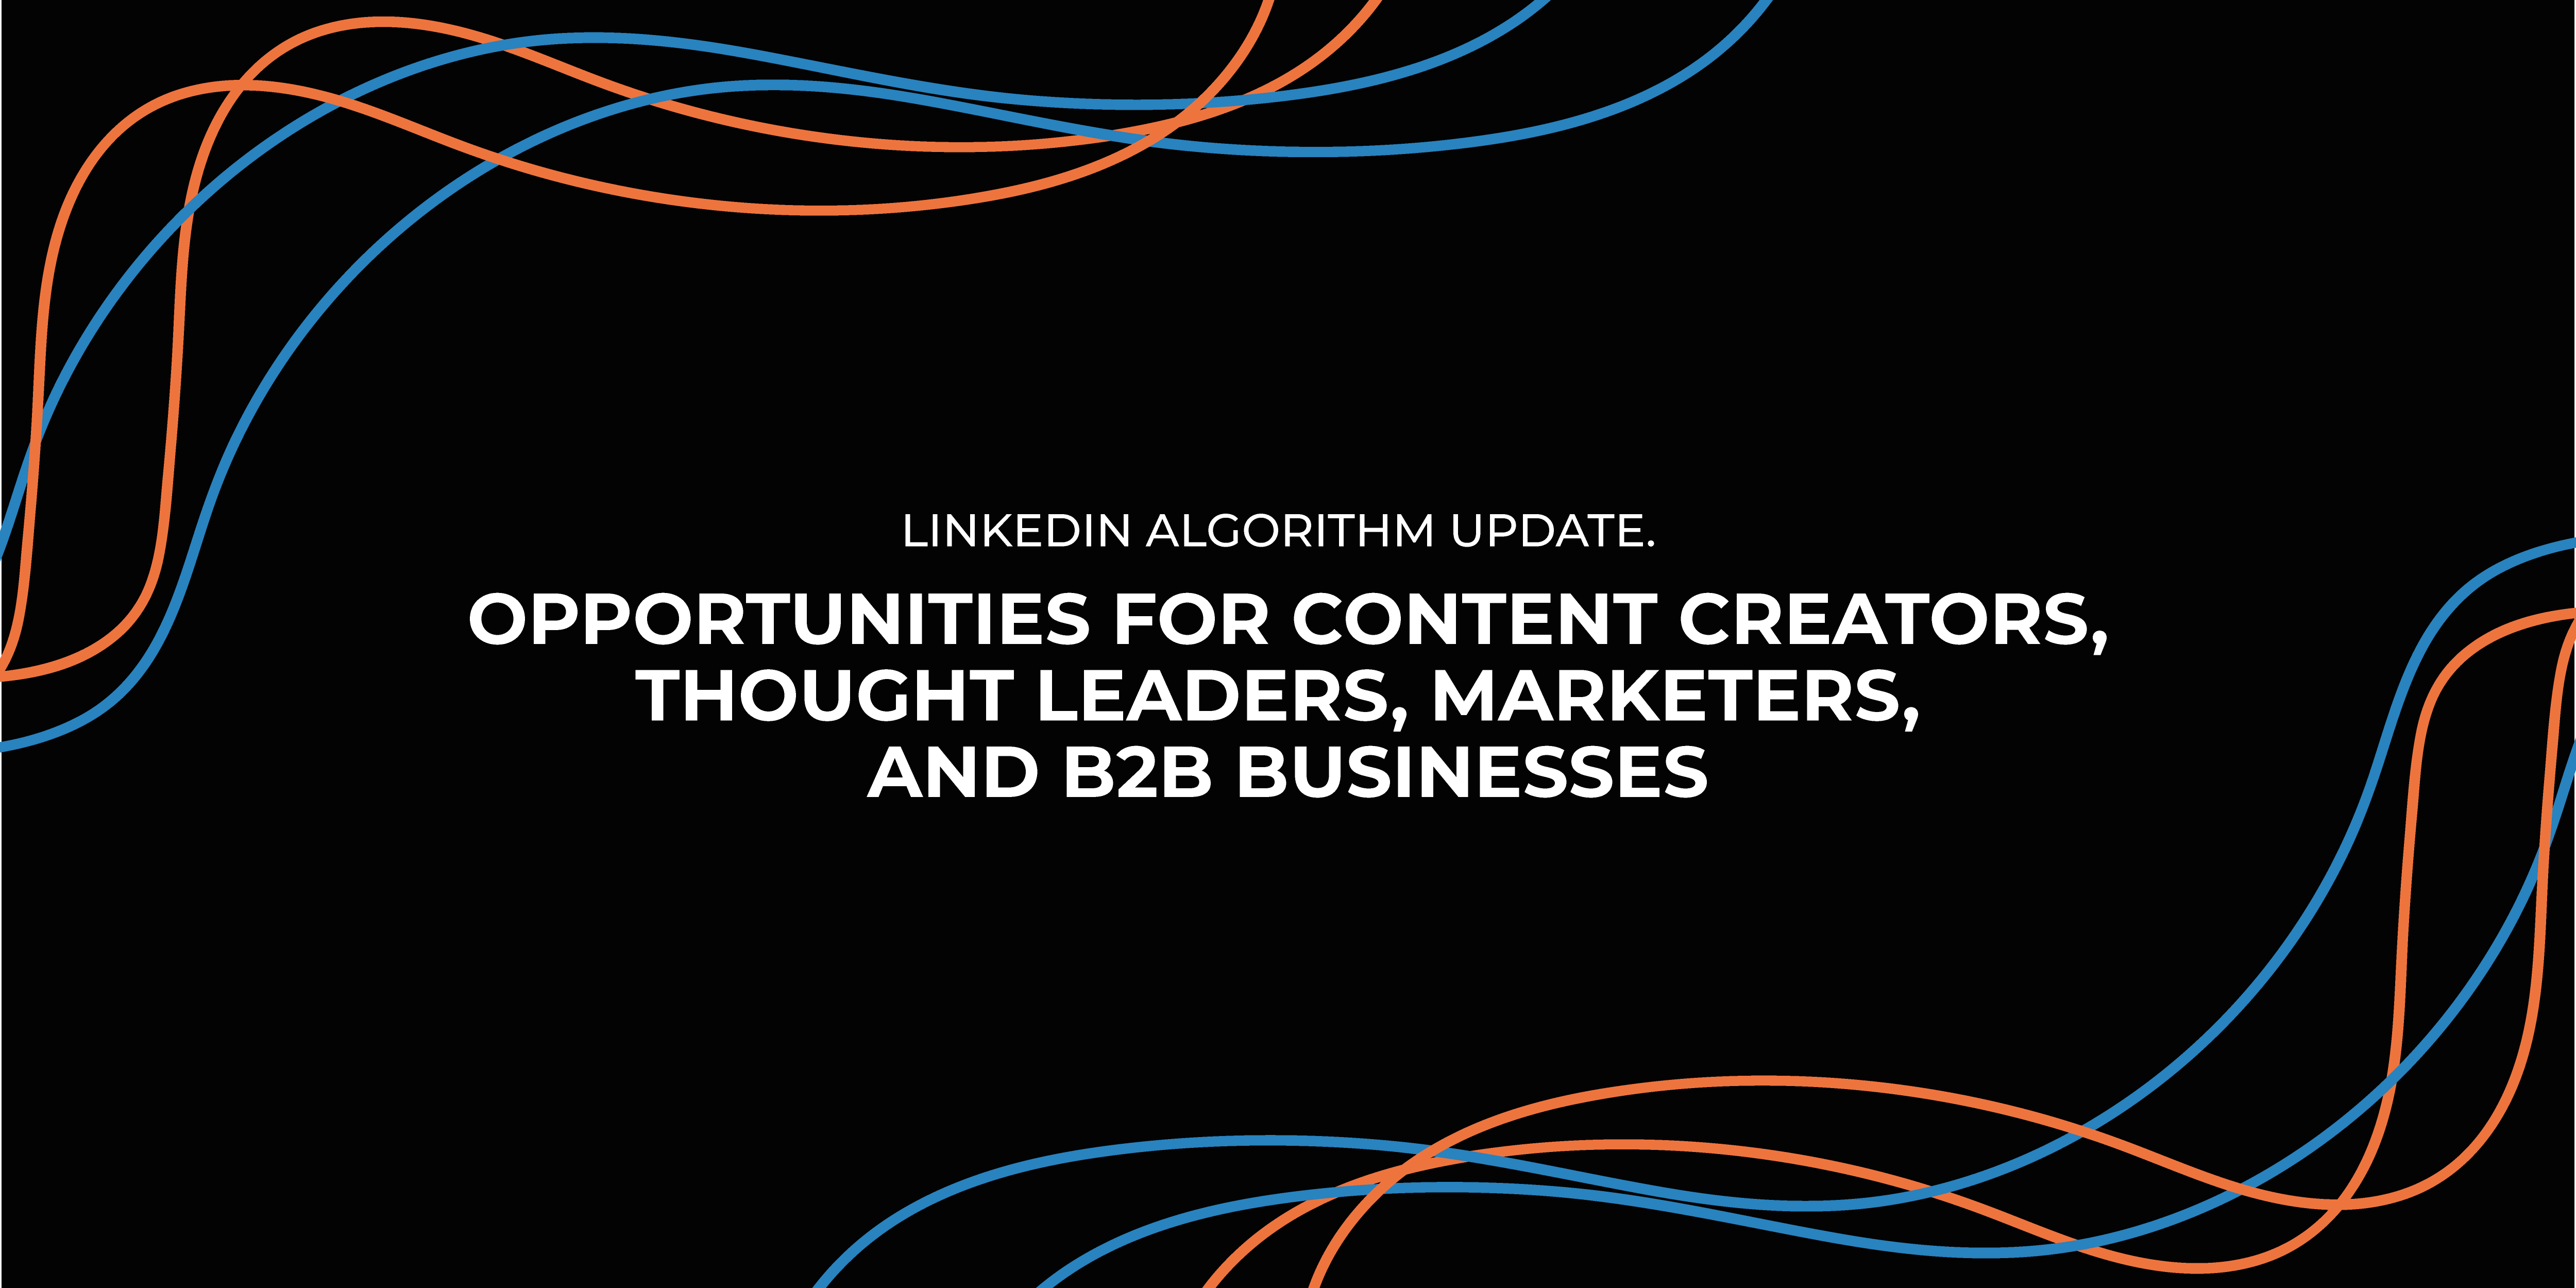 LinkedIn Algorithm Update: Opportunities for Content Creators, Thought Leaders, Marketers, and B2B Businesses